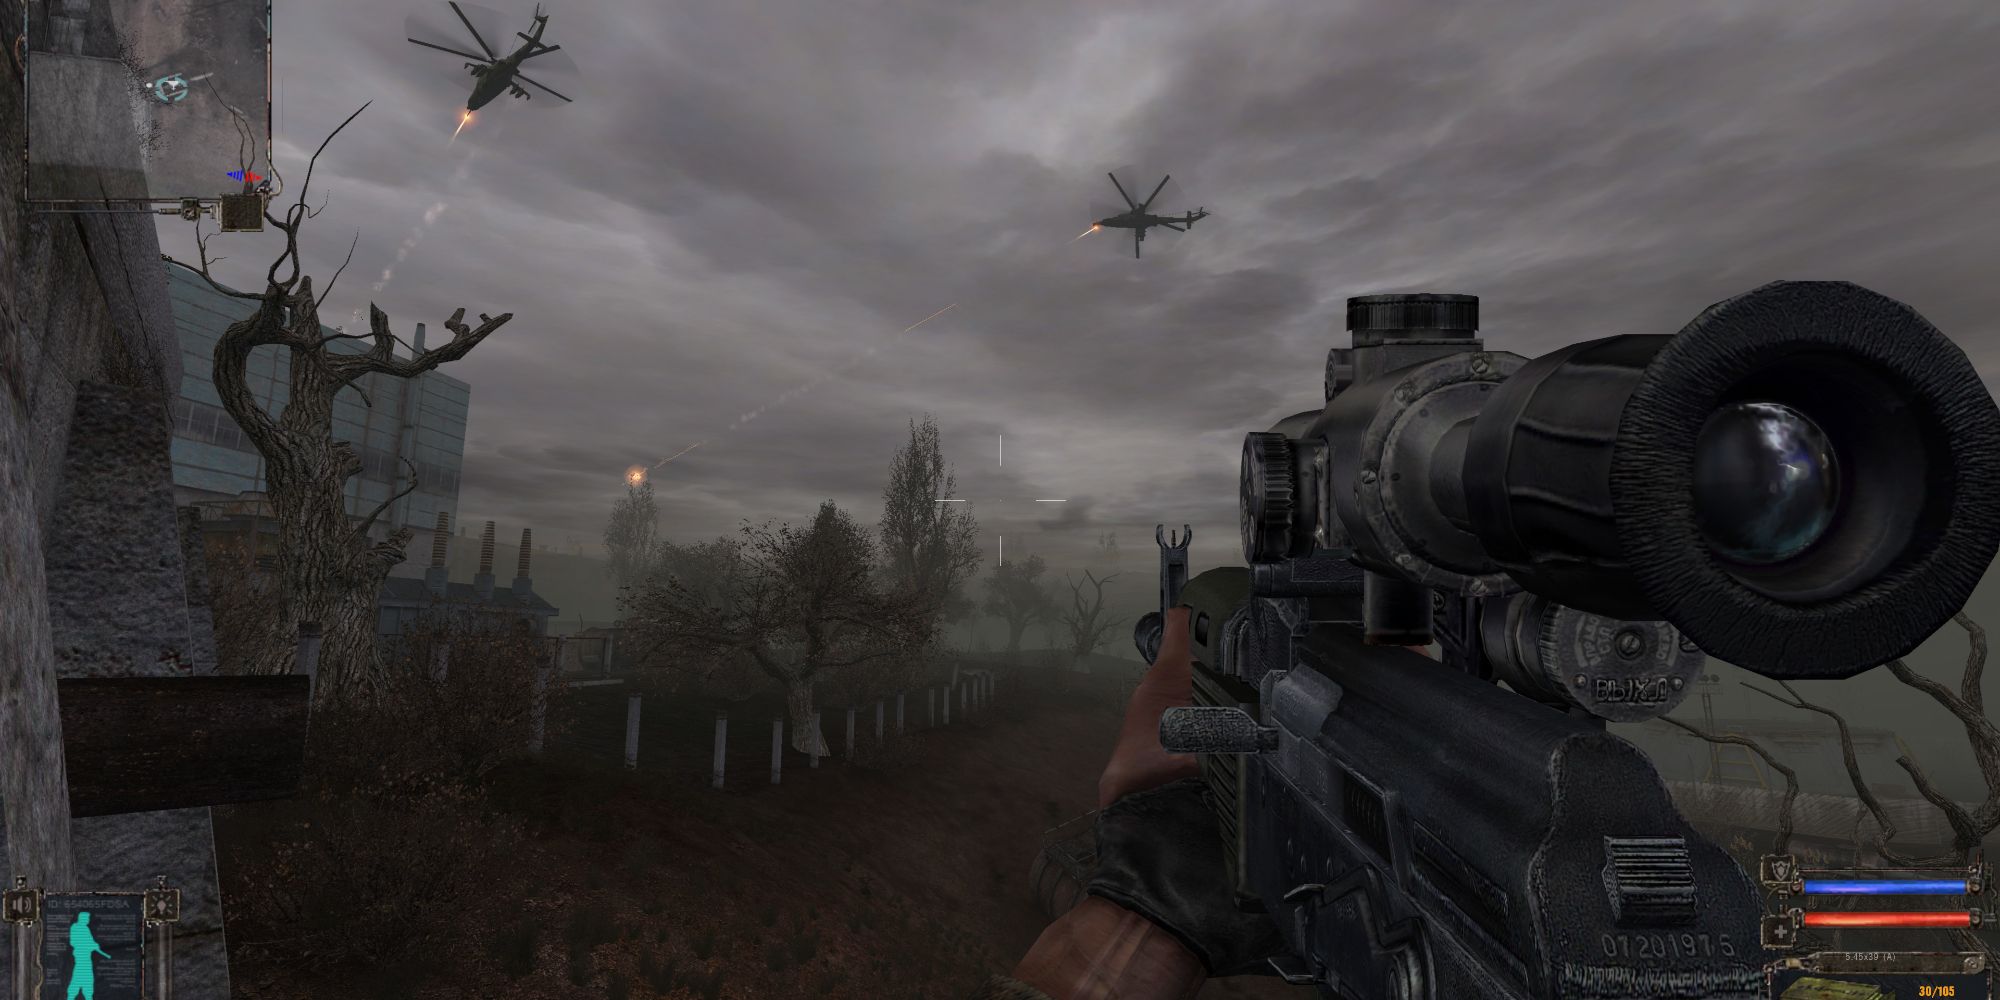 Walking down a deserted path with your gun as choppers fly overhead.